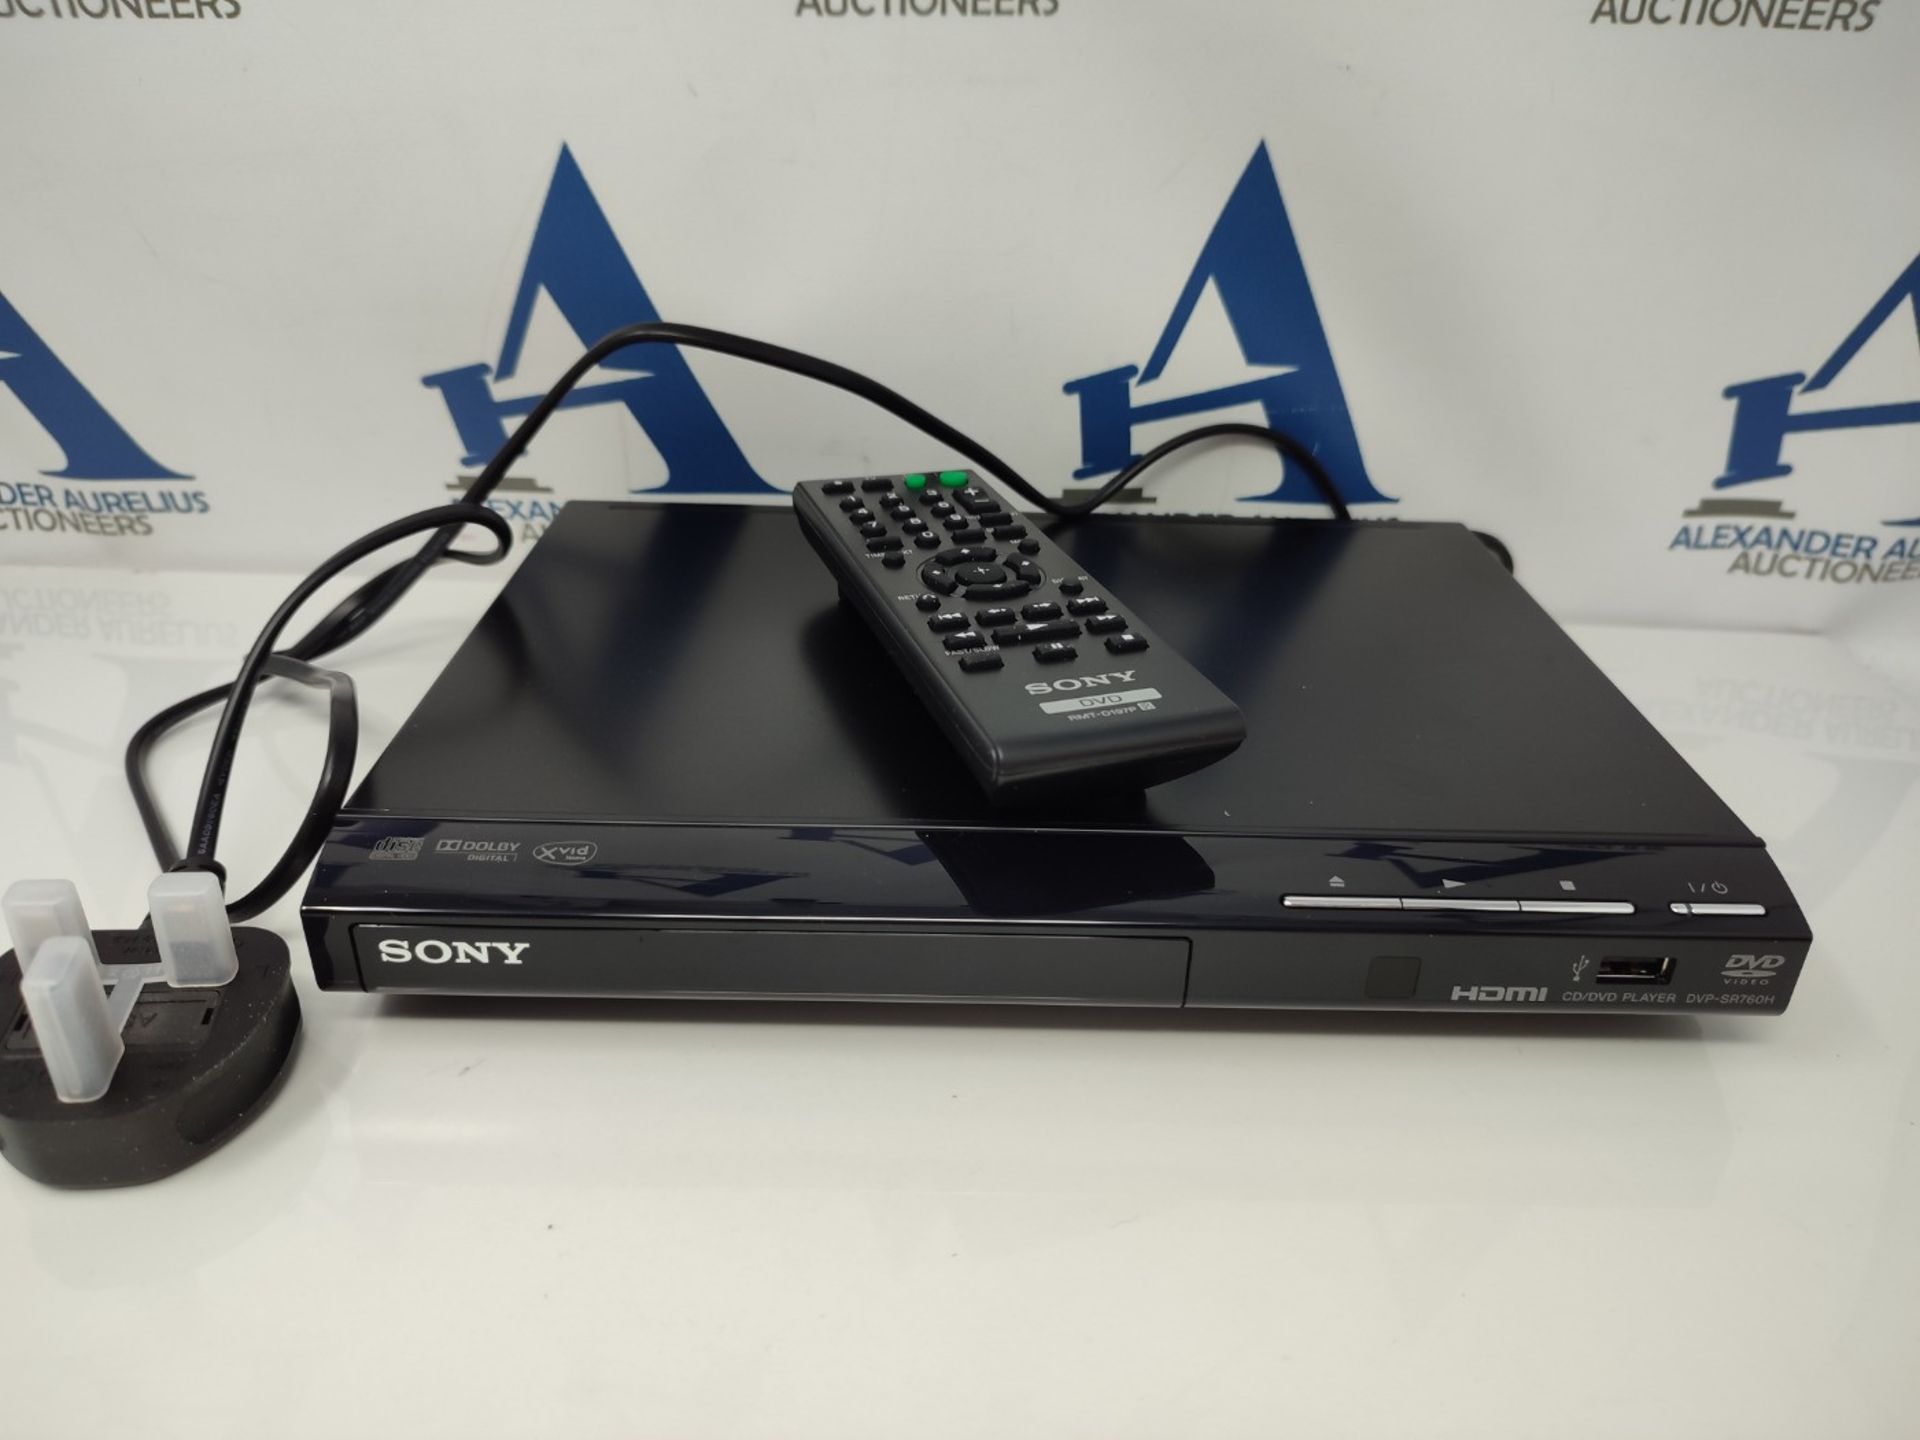 Sony DVPSR760H DVD Upgrade Player (HDMI, 1080 Pixel Upscaling, USB Connectivity), Blac - Image 3 of 3